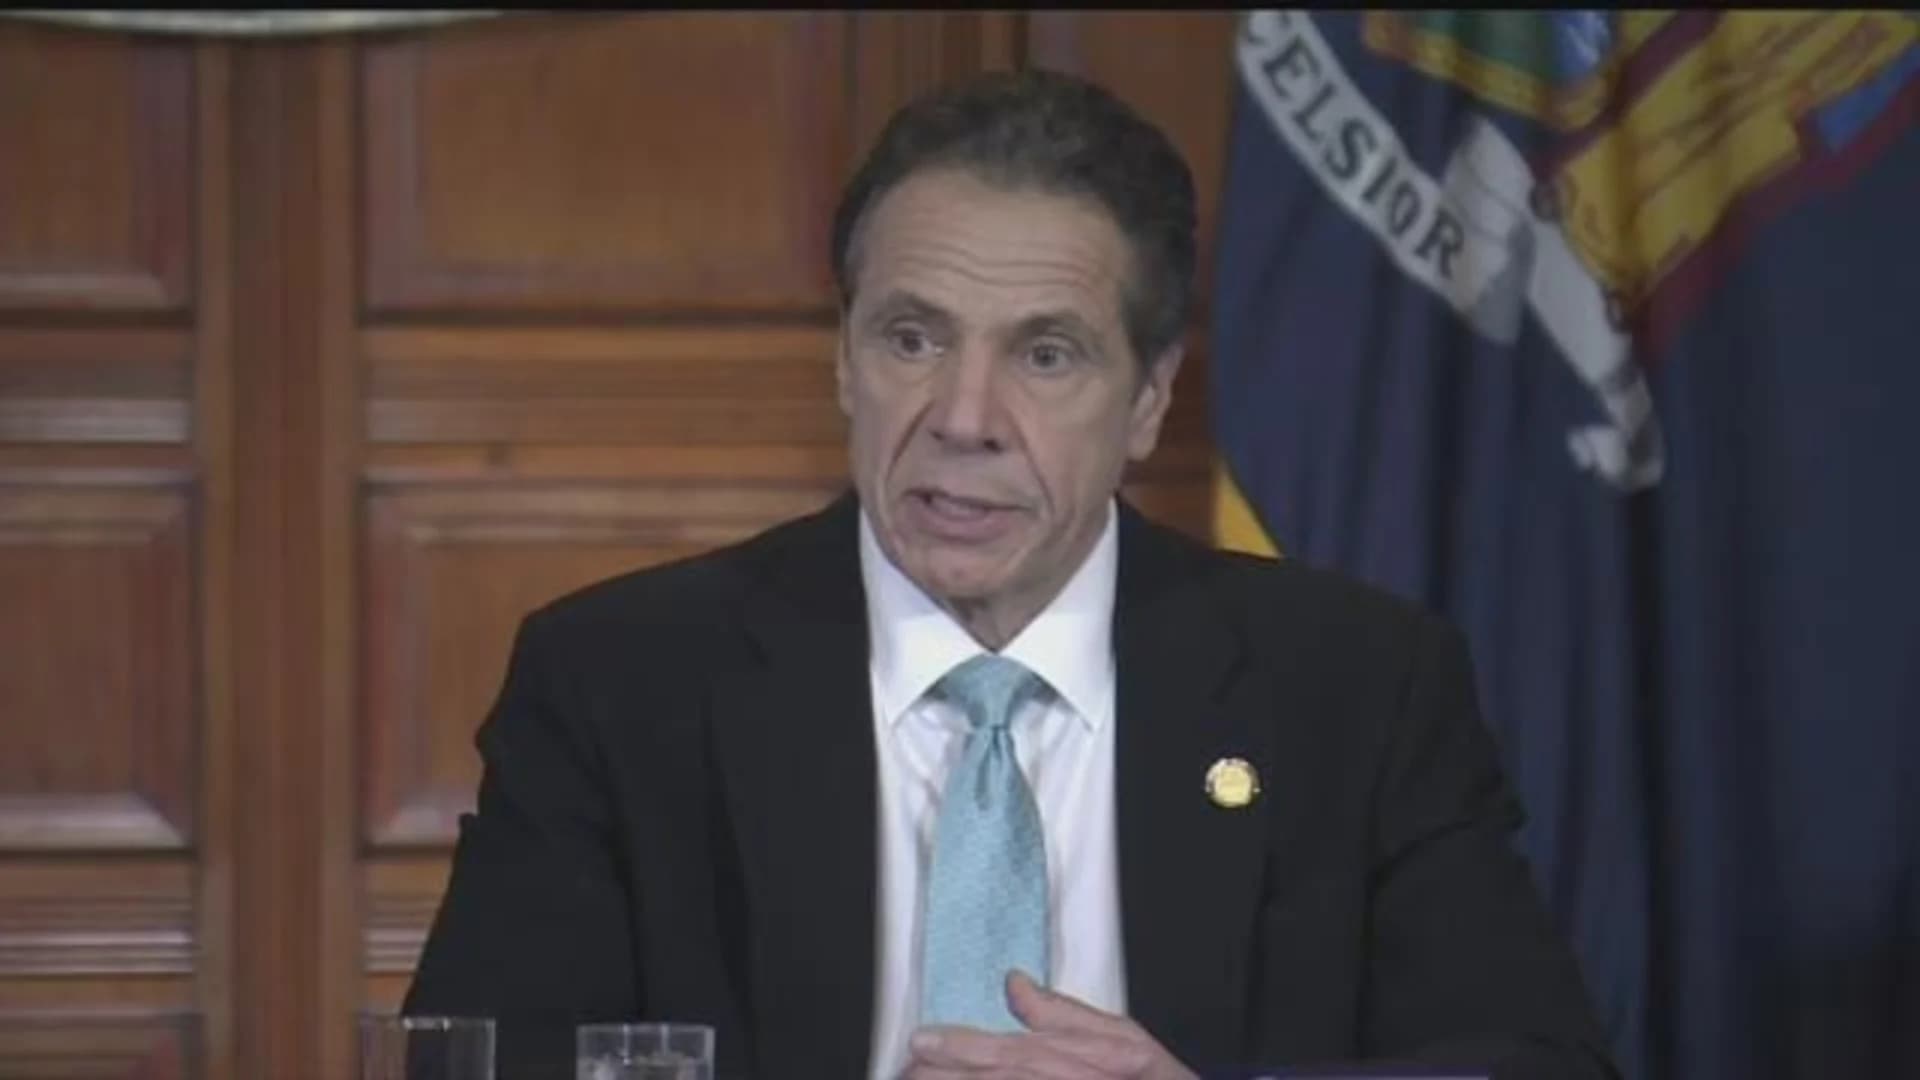 New York Gov. Cuomo gives daily briefing on coronavirus outbreak